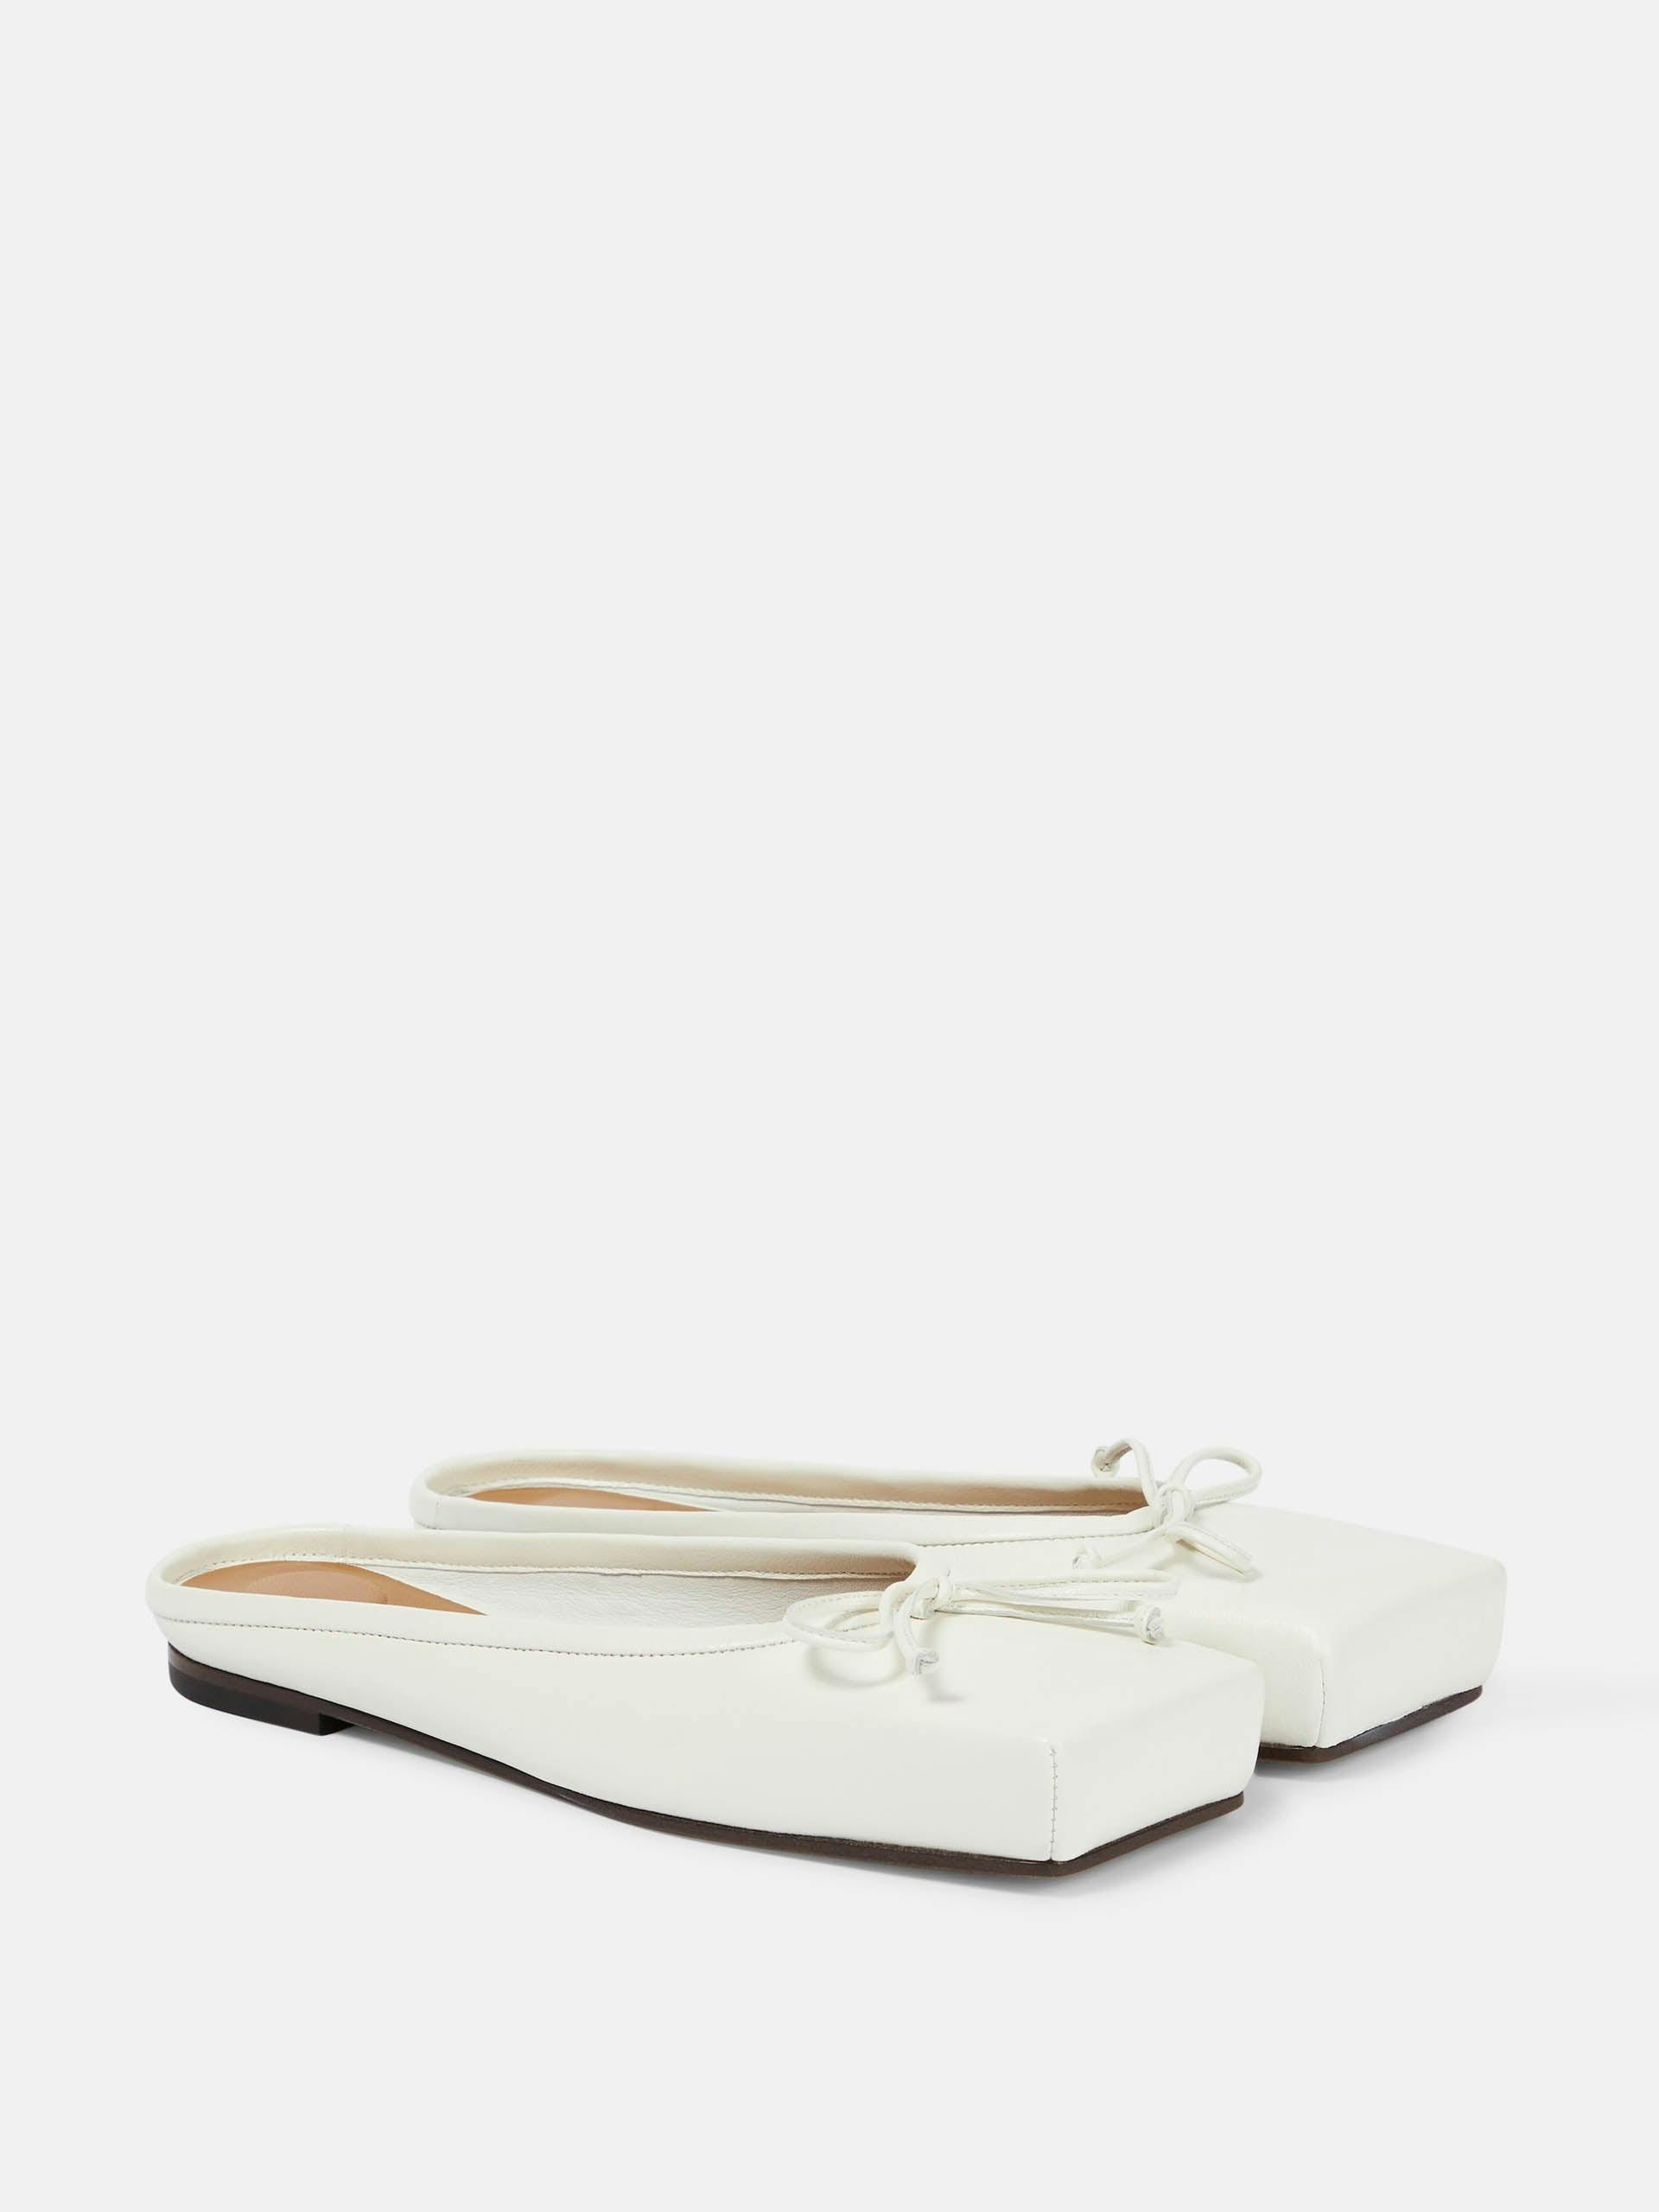 Les Mules Plates ballet flats in white